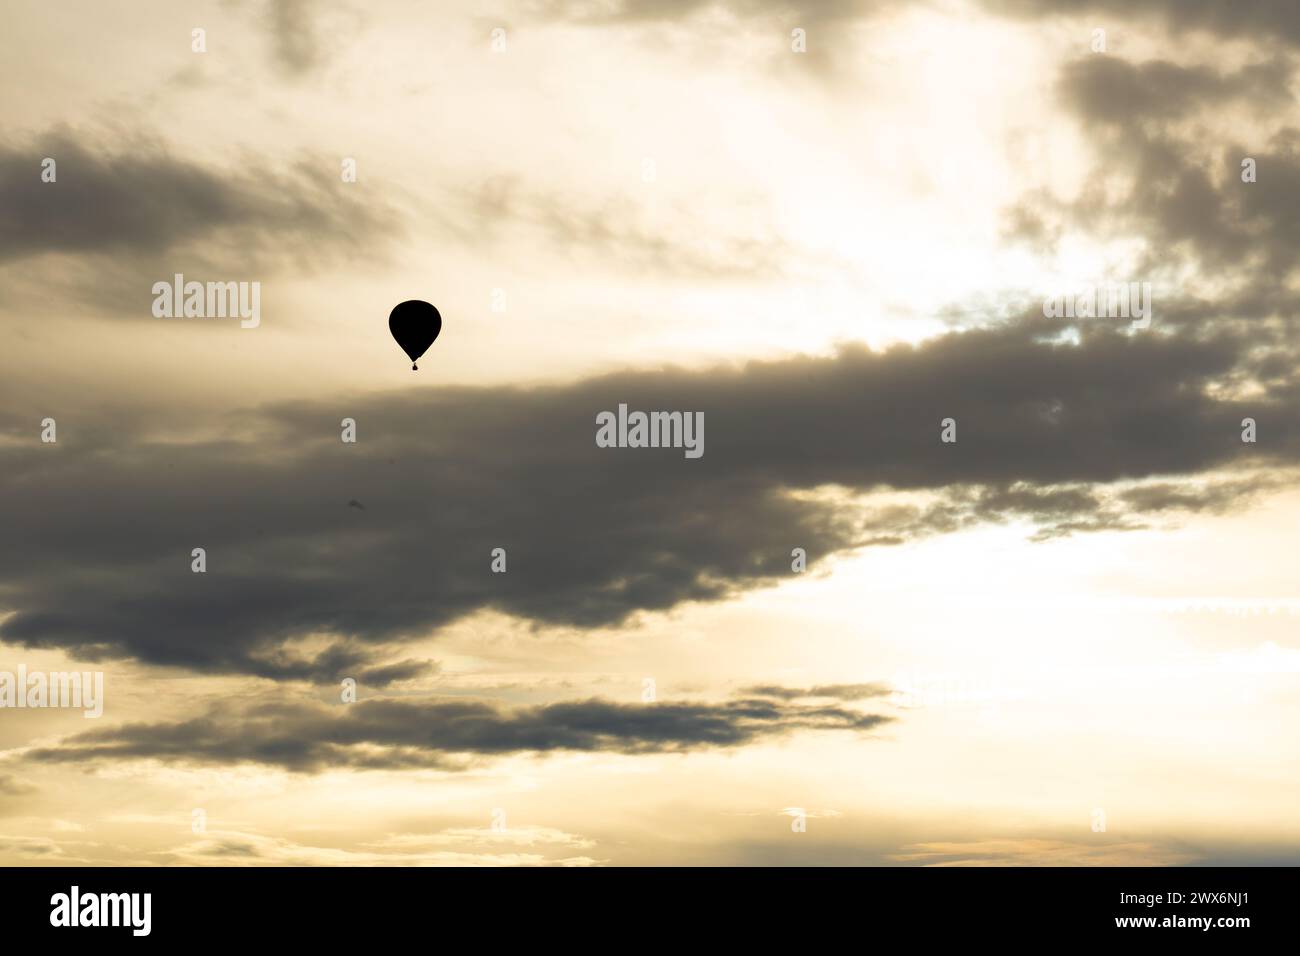 Hot air balloon flying in a cloudy sky Stock Photo